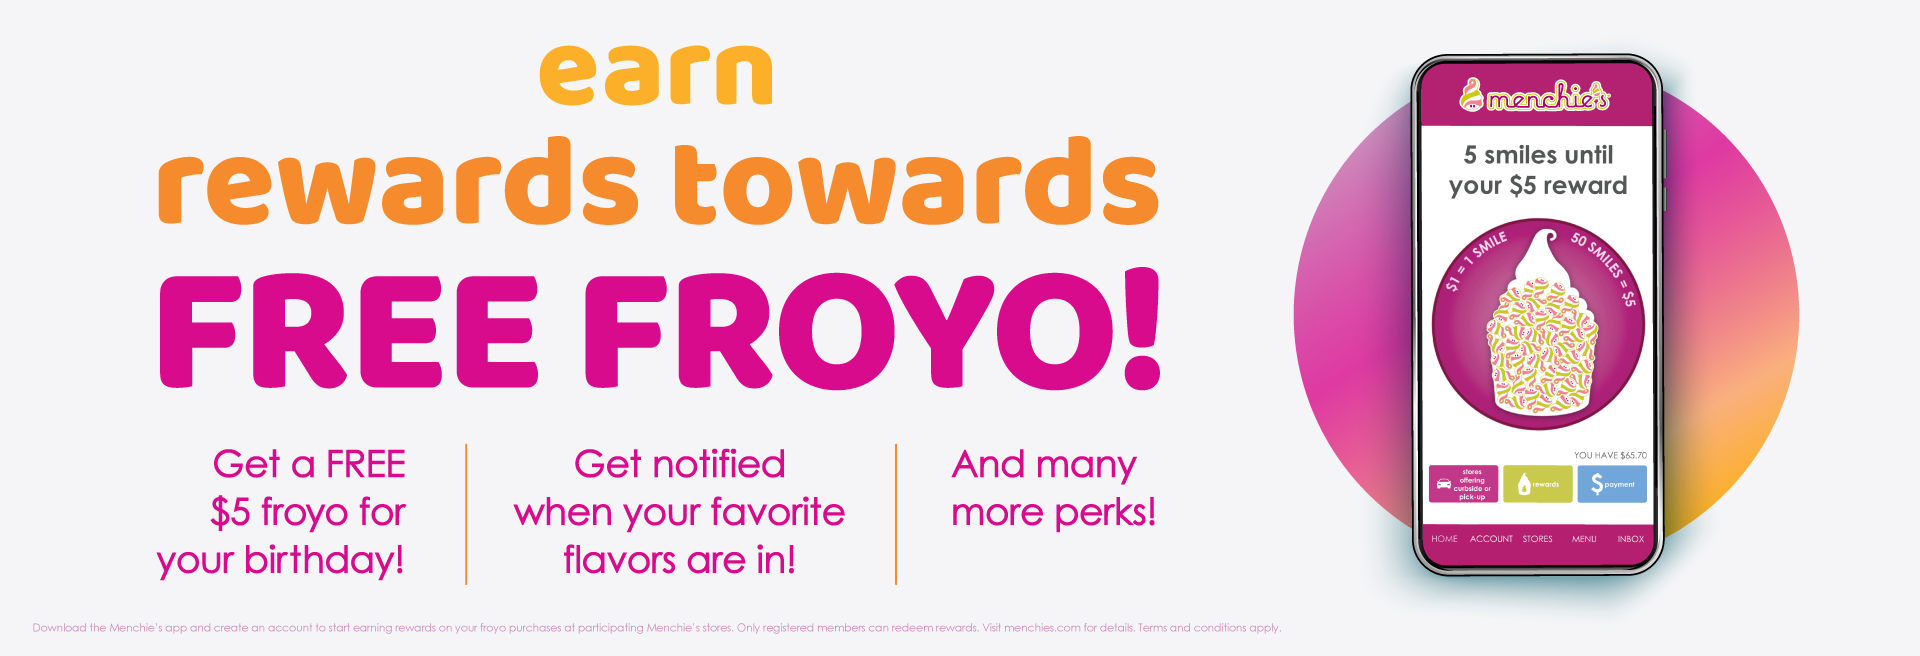 Earn rewards and get extra perks when you download the Menchie’s app!